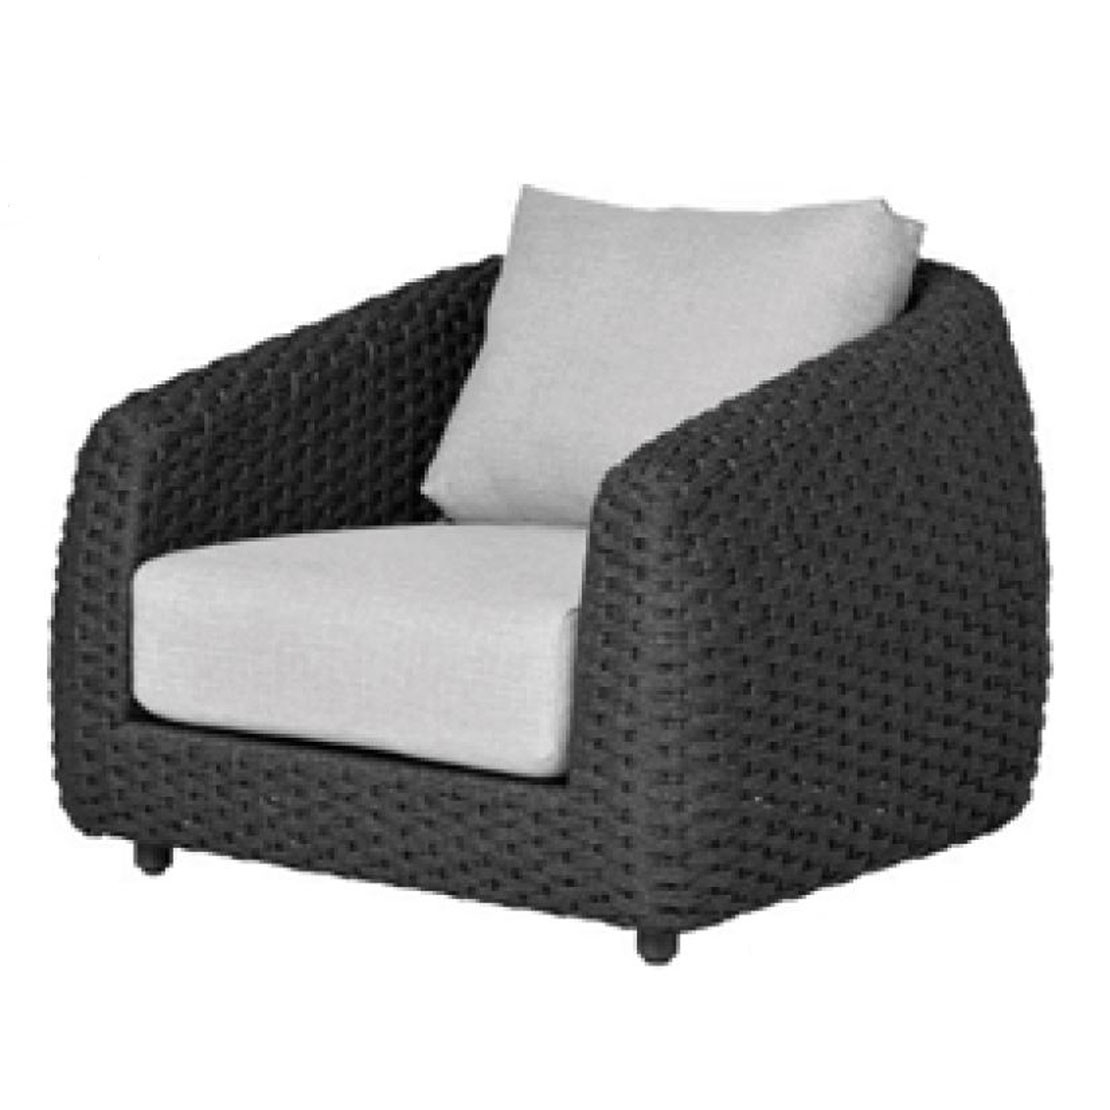 Saint-Tropez living chair anthracite with 2 cushions